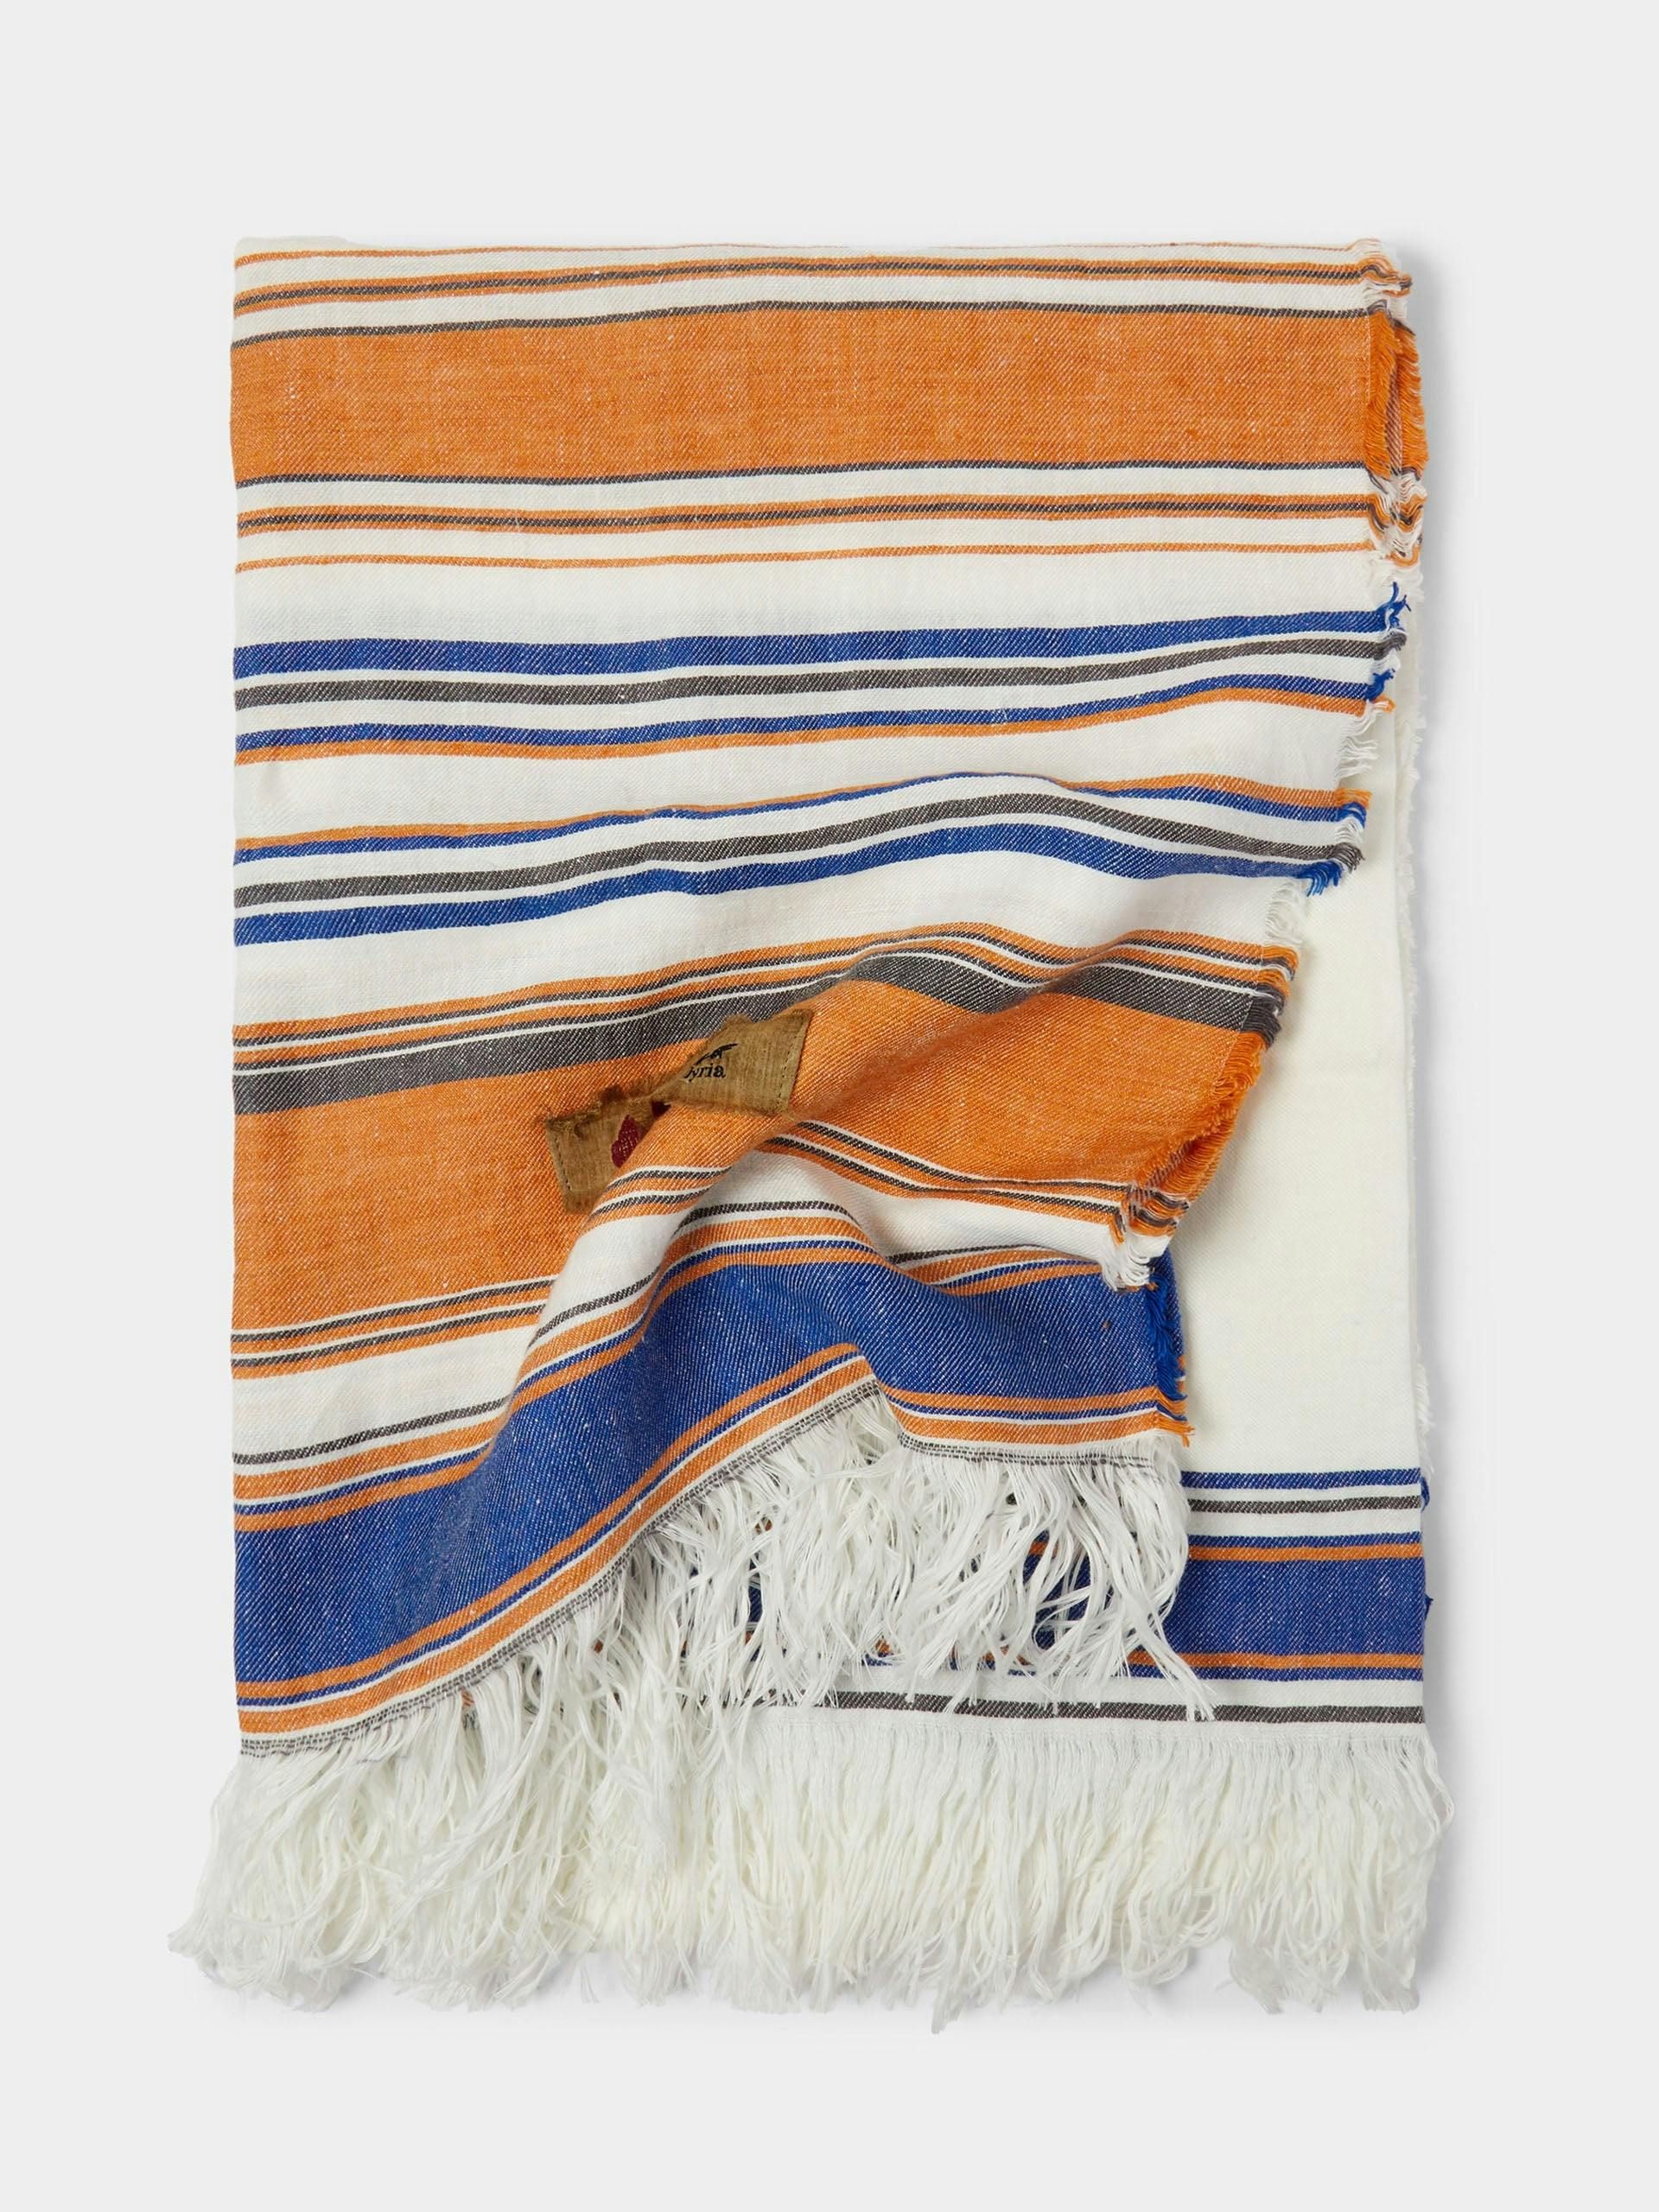 Canche handwoven linen and cotton blanket